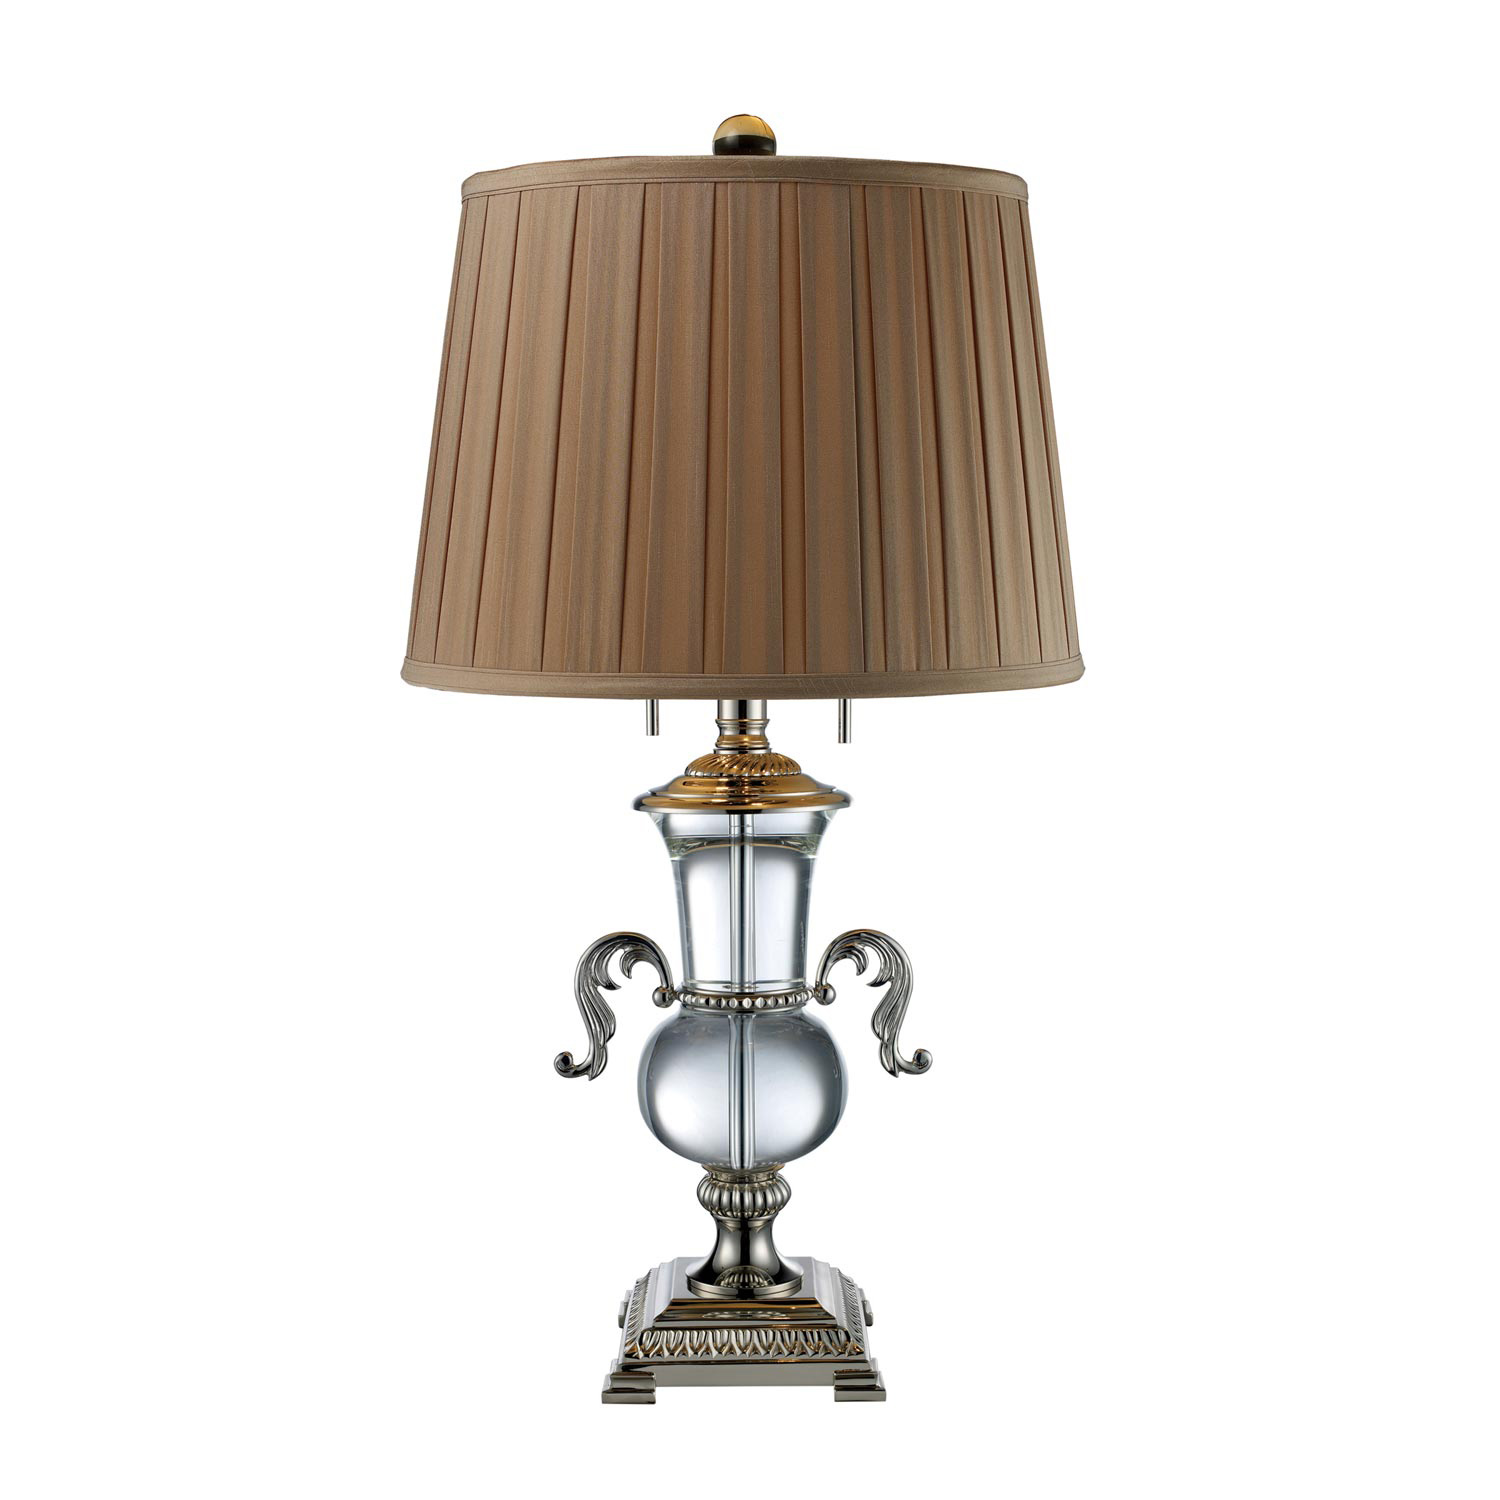 Elk Lighting D1810 Raven Table Lamp - Clear Crystal and Polished Nickel